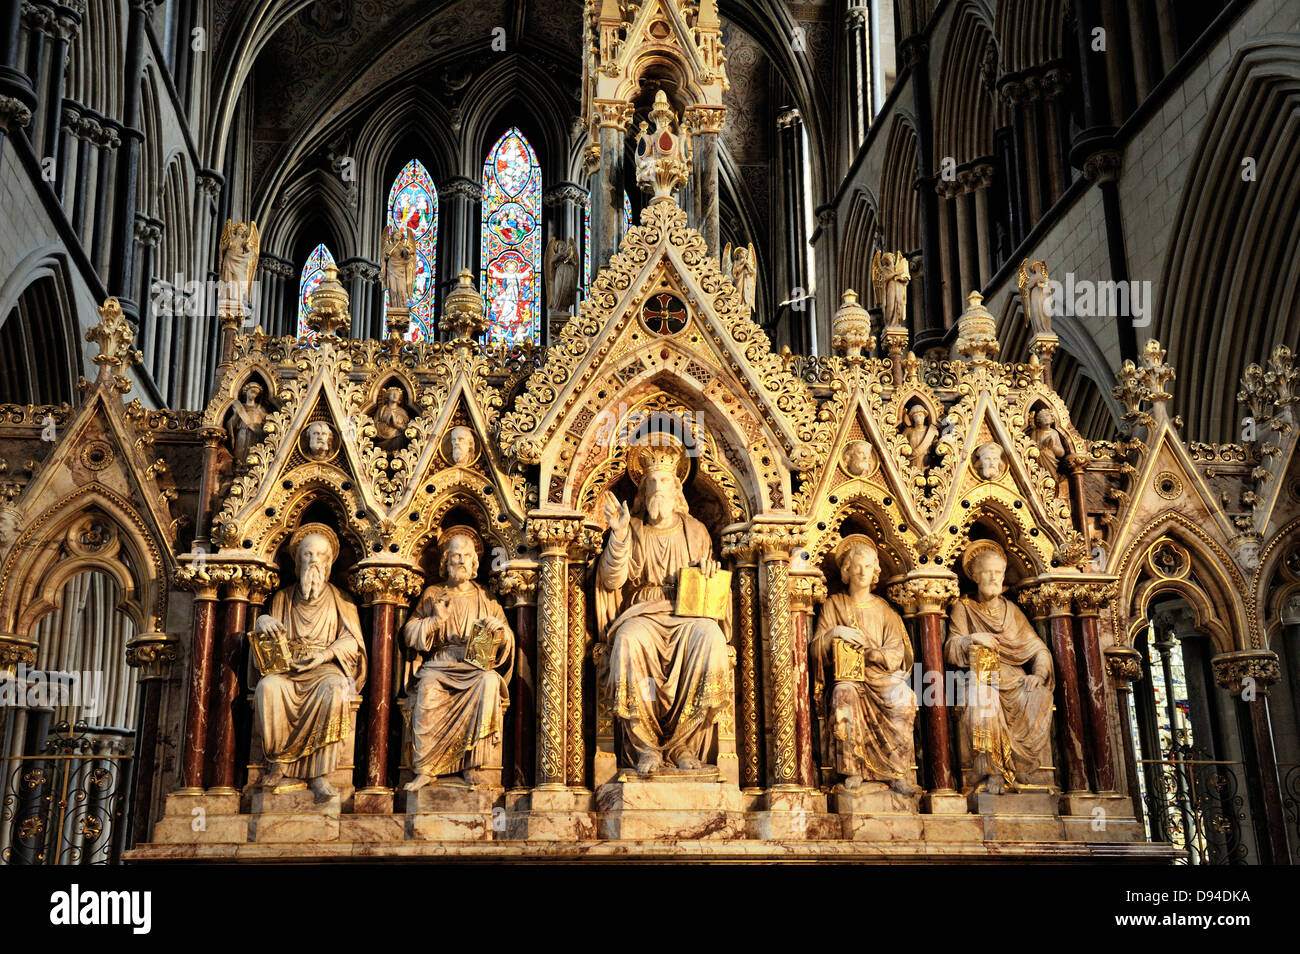 Worcester Cathedral, England. Intricate carving of the High Altar before the East Window Stock Photo